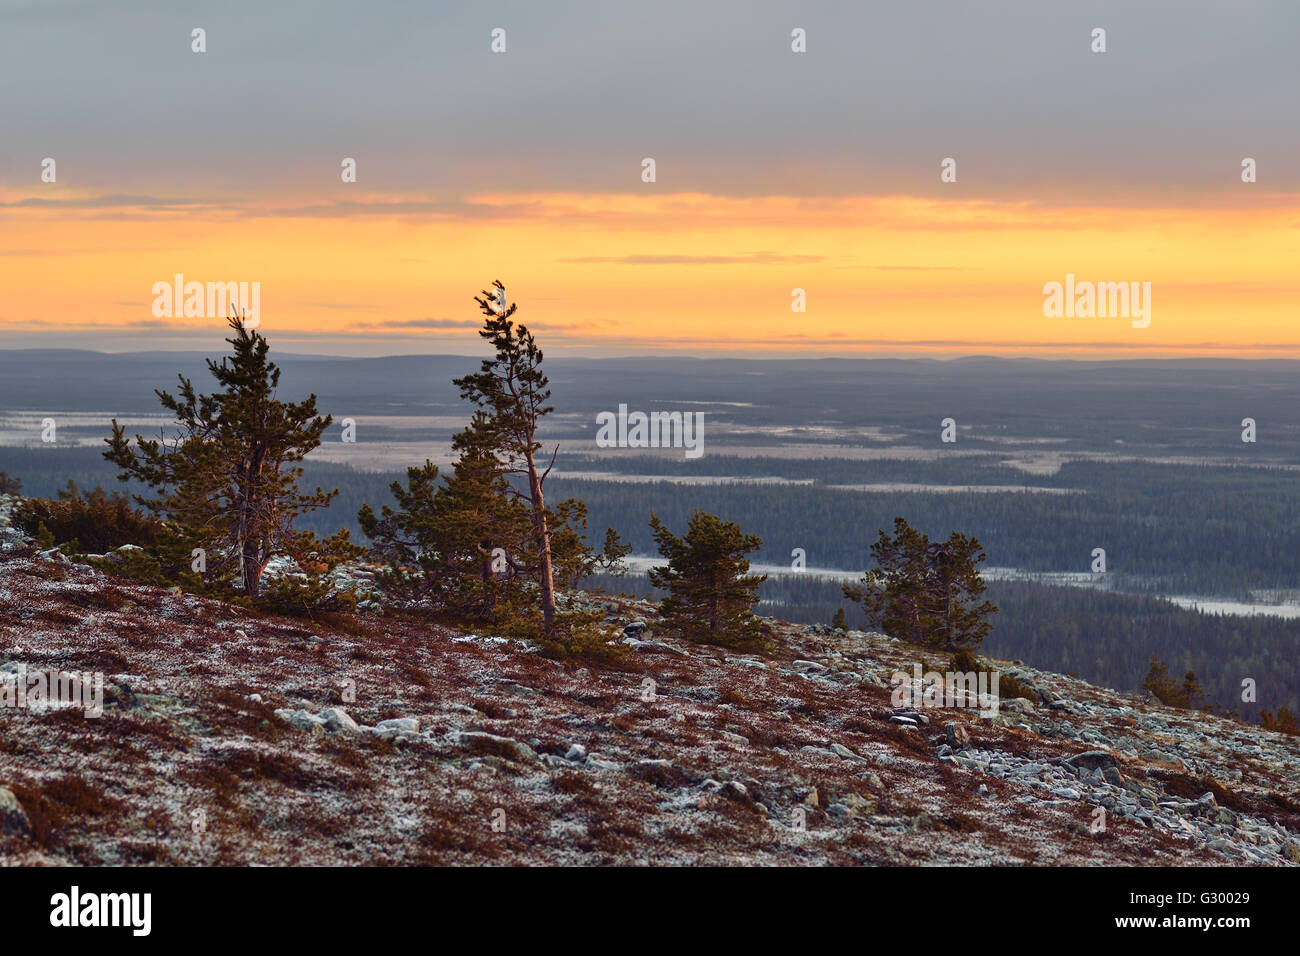 Evening scenery from a mountain in Lapland, Finland Stock Photo